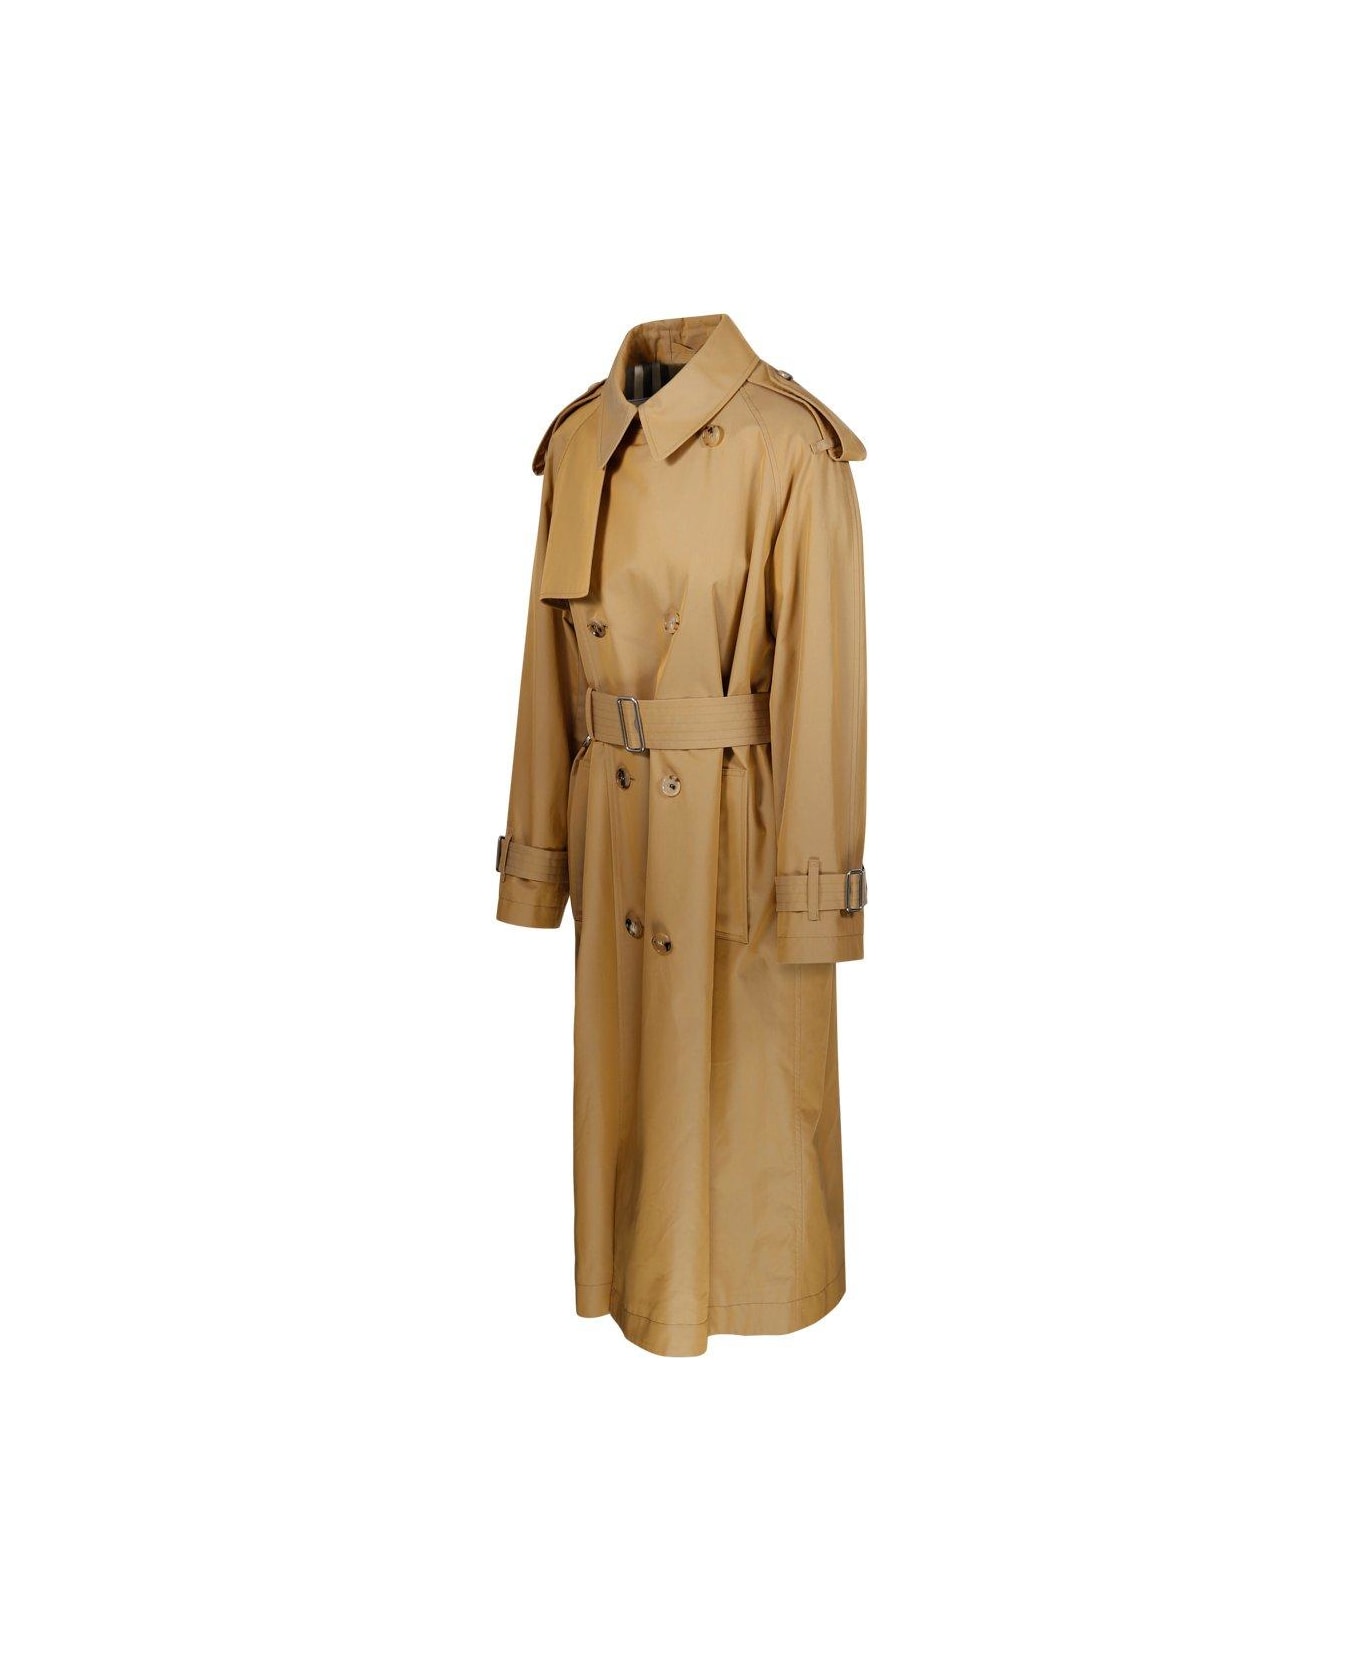 Burberry Kensington Heritage Double Breasted Belted Trench Coat - Beige レインコート